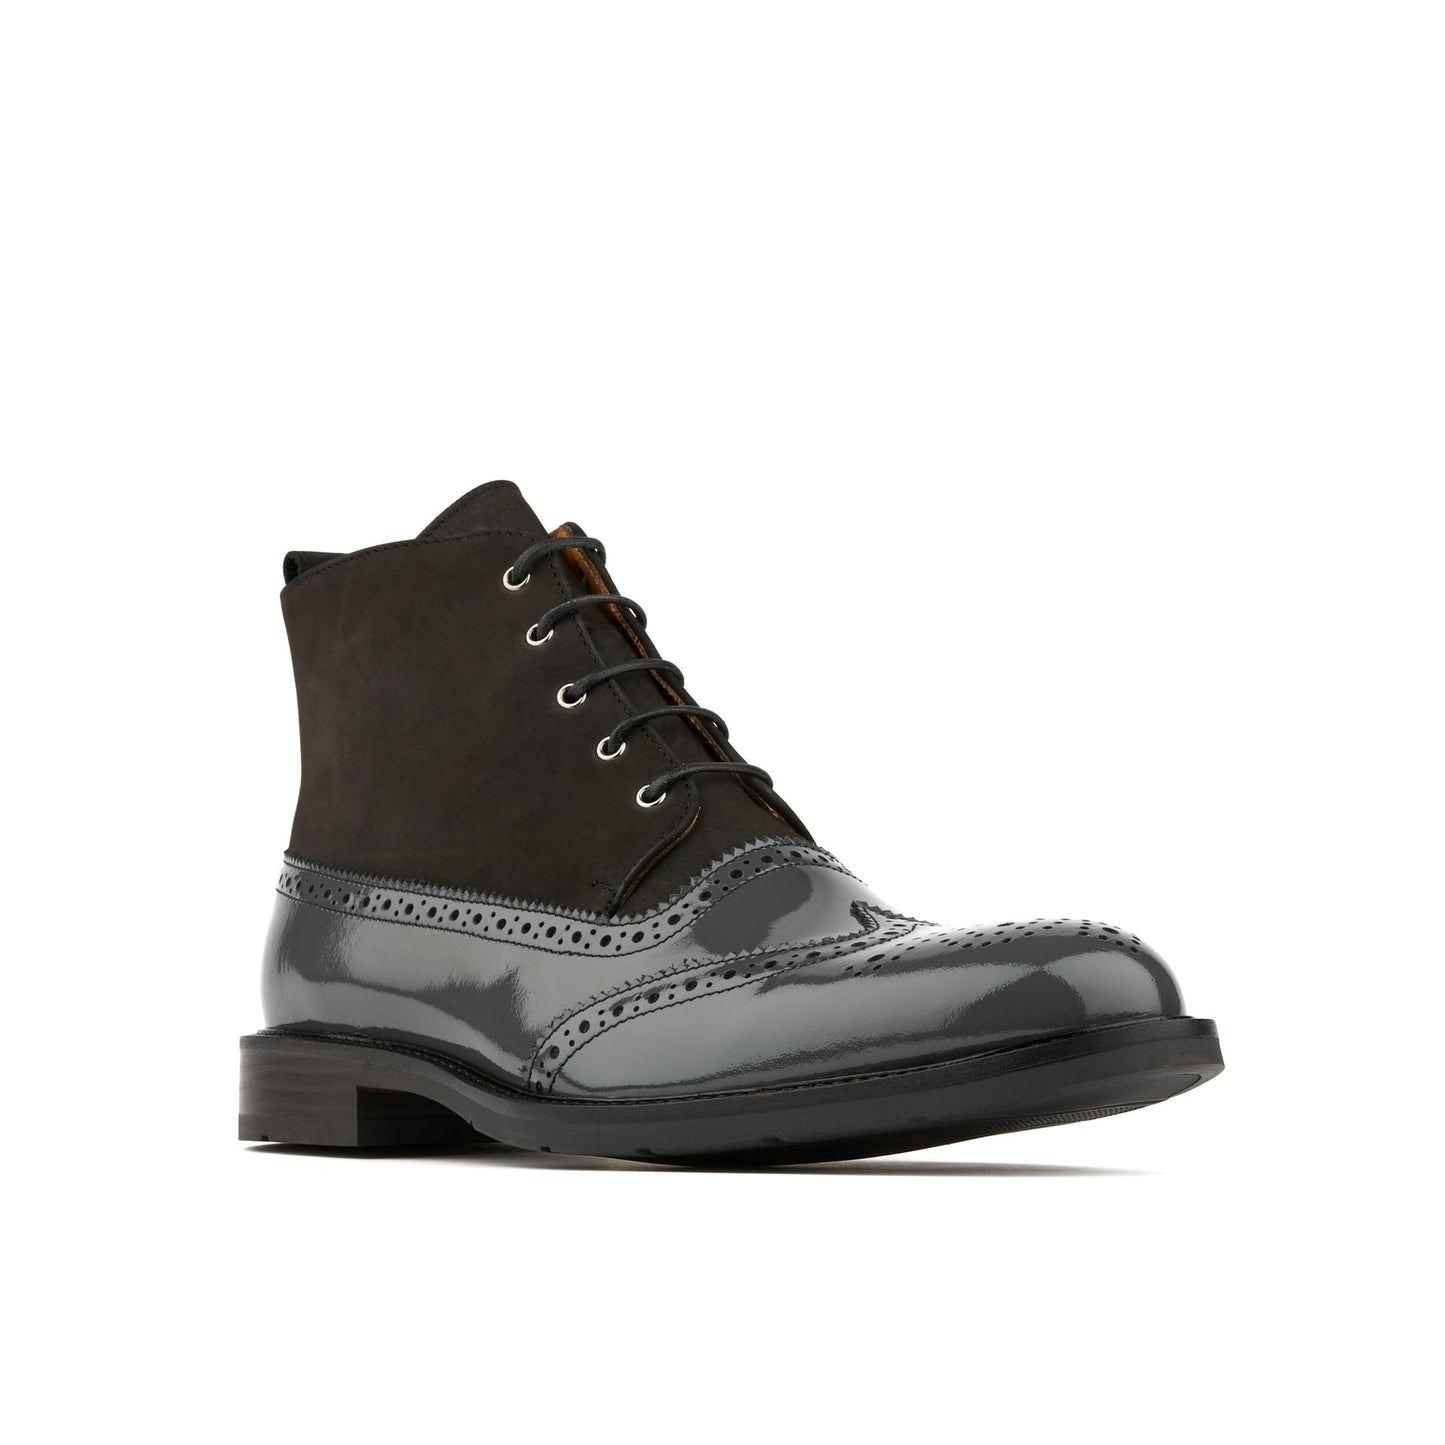 William - Grey & Black Ankle Boots Embassy London 